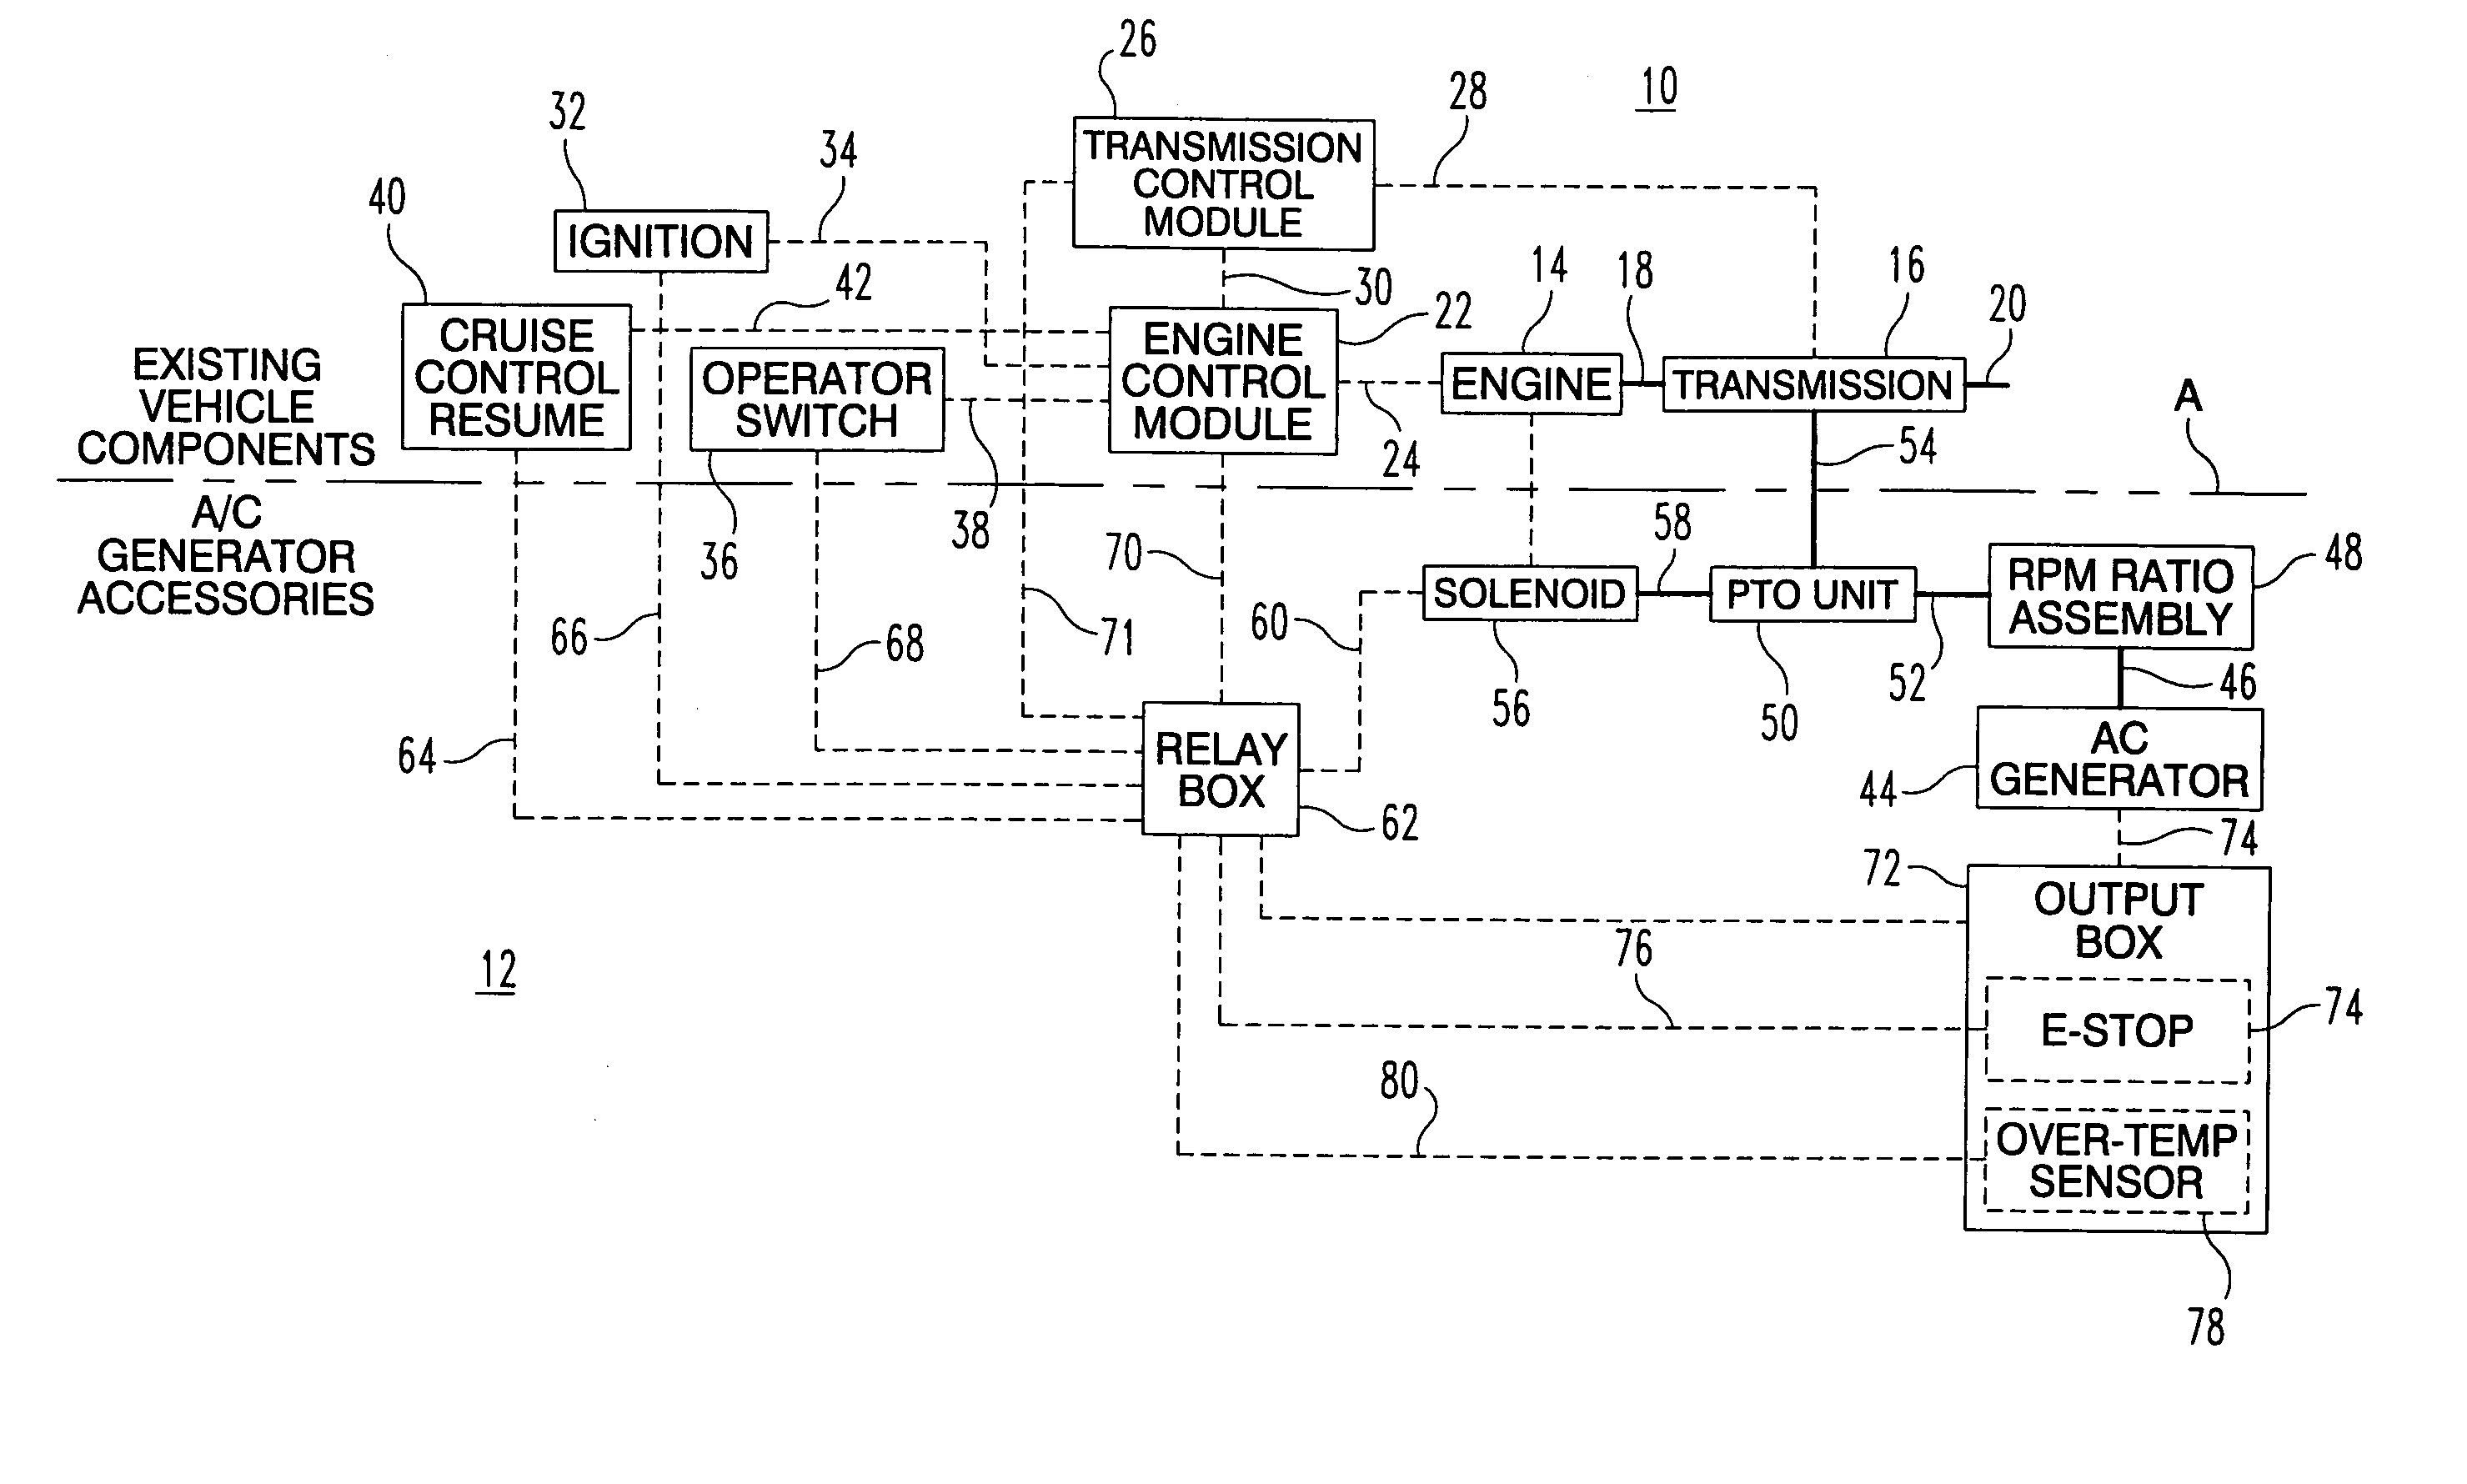 Vehicle mounted electrical generator system